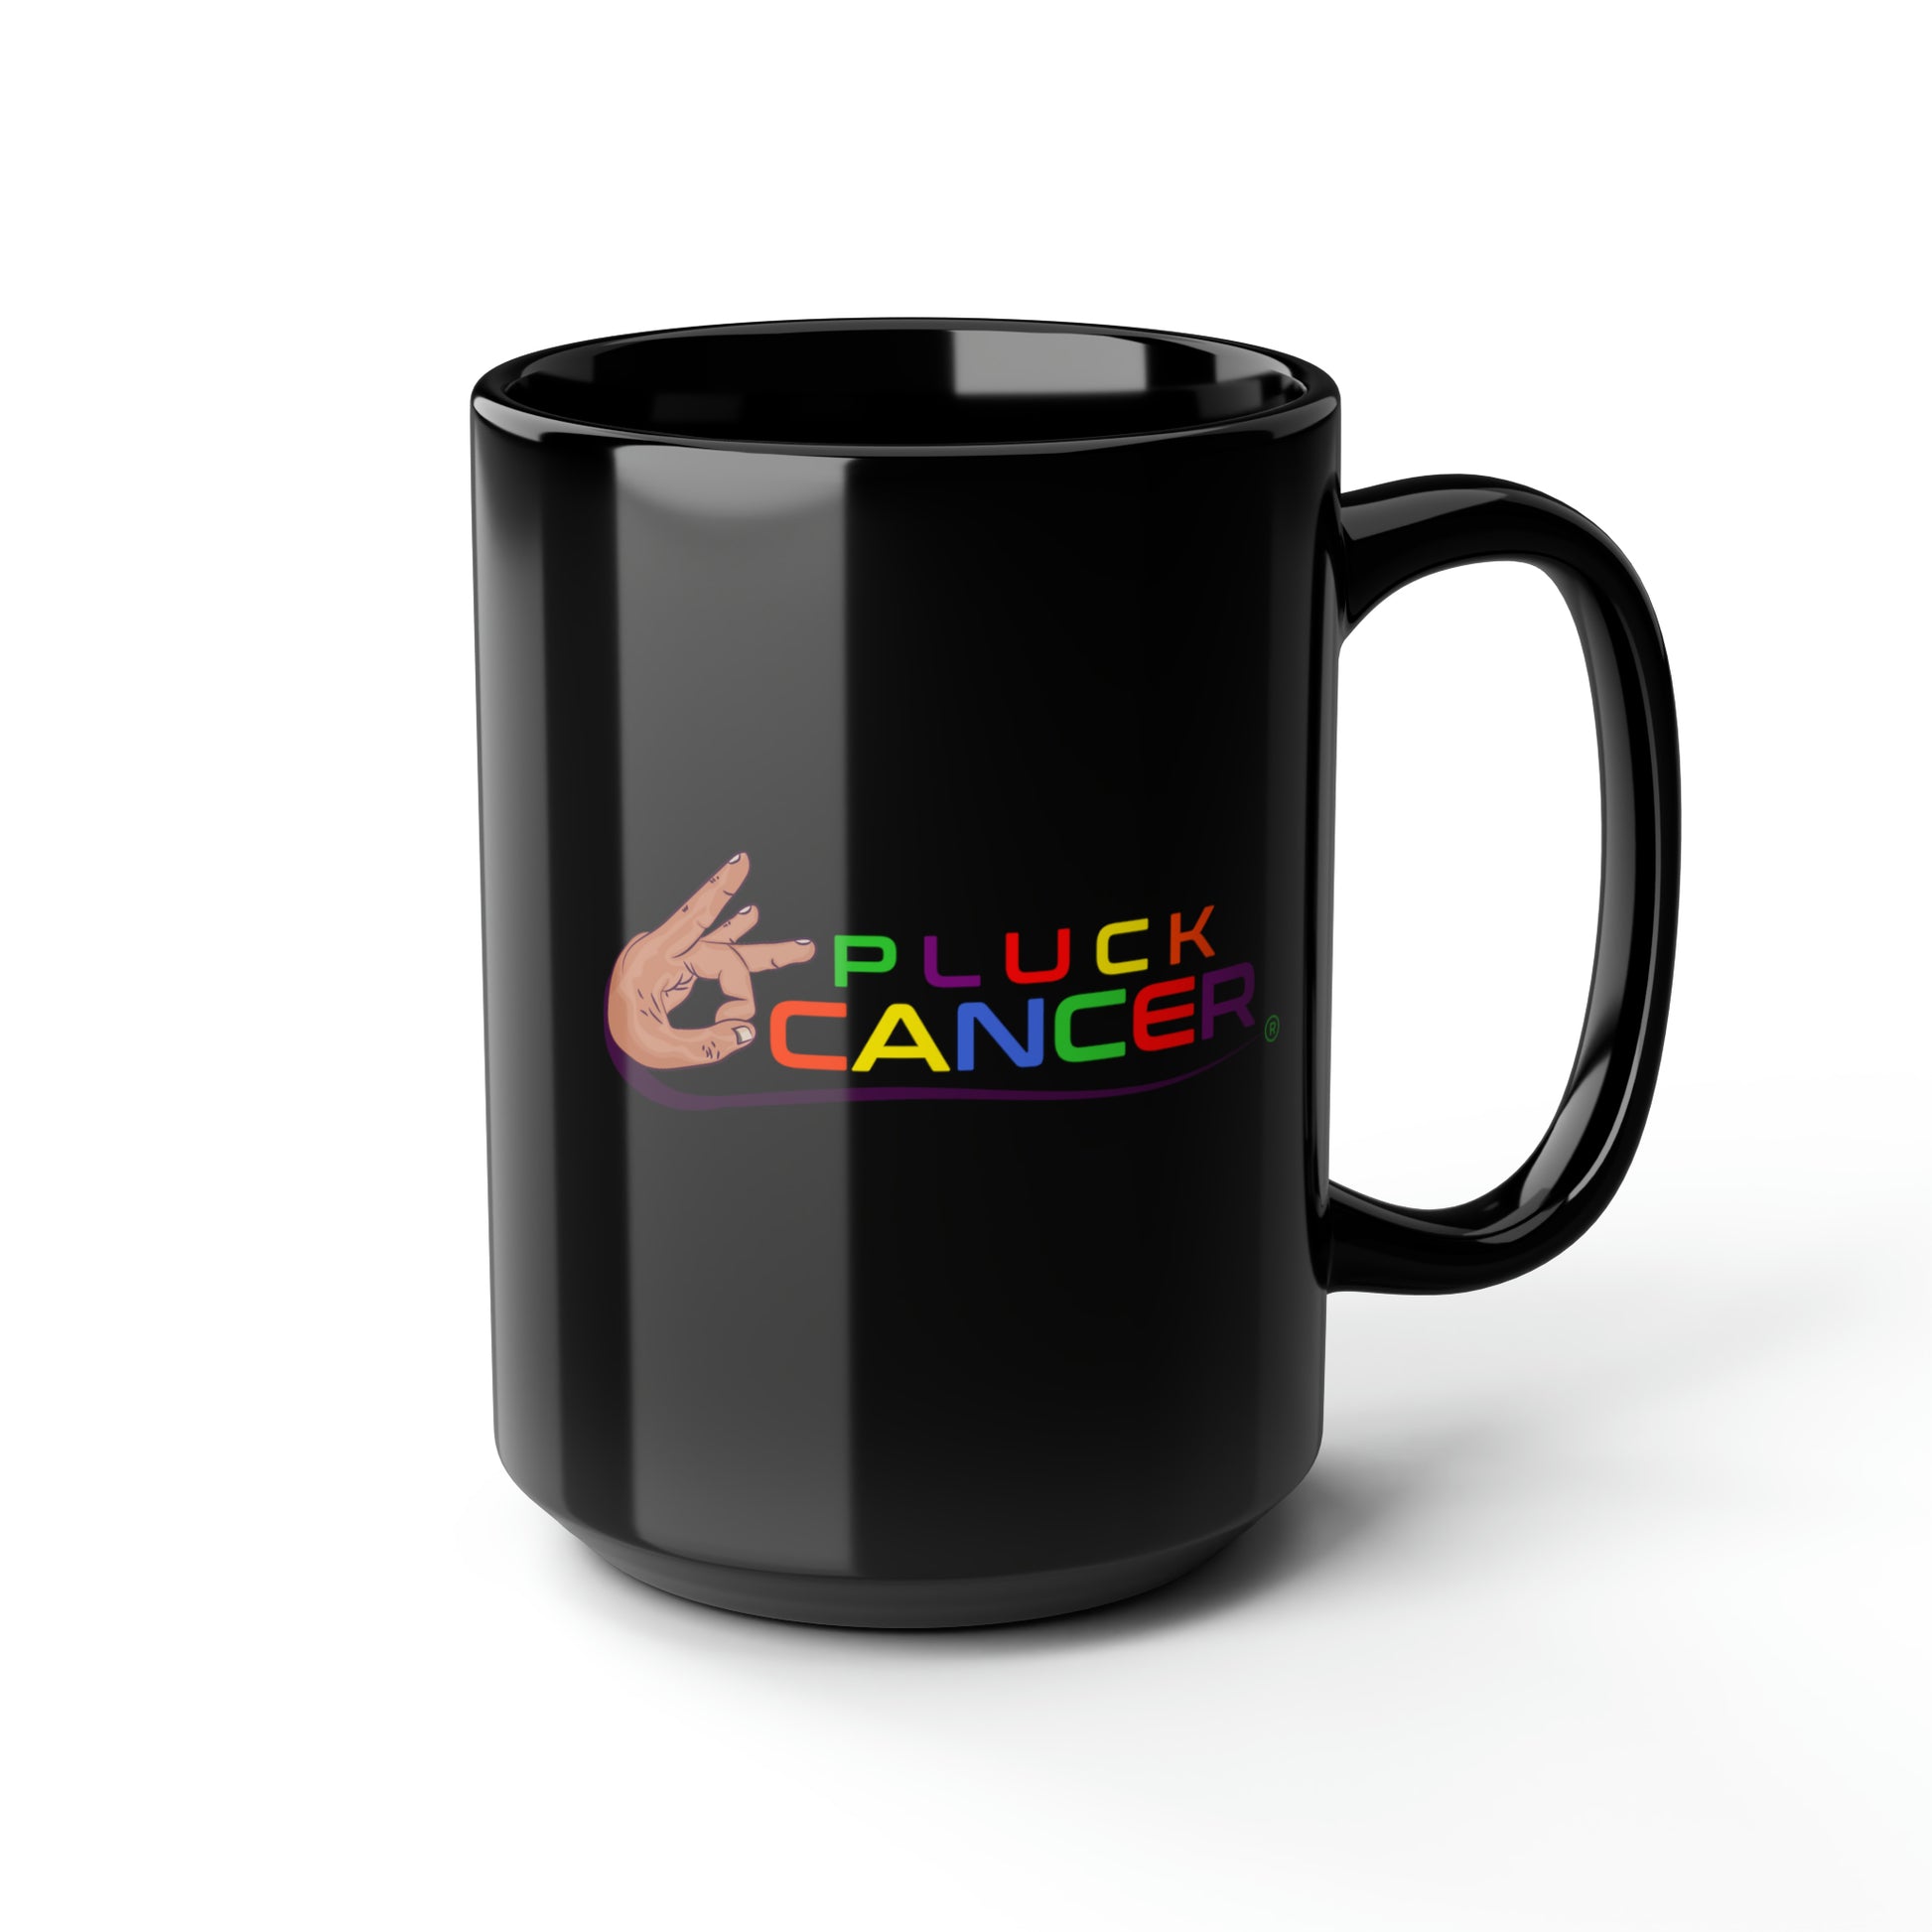 Show your support and raise awareness with our PLUCK CANCER 15oz Black Mug. A meaningful way to start your day with every sip. Get yours today and join the fight against cancer.